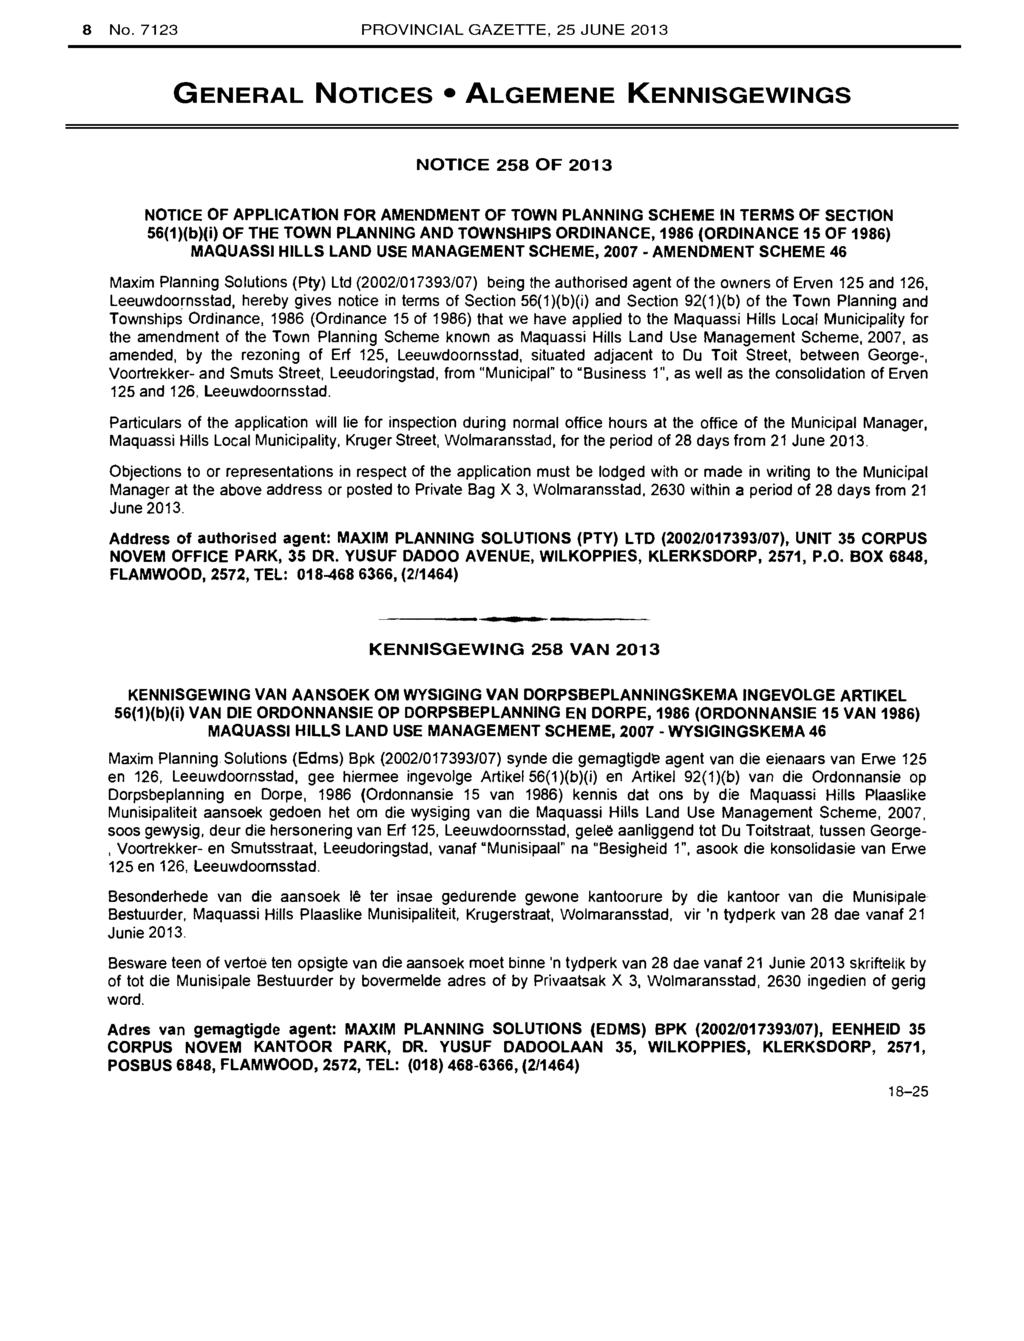 8 No. PROVINCIAL GAZETTE, 25 JUNE 2013 GENERAL NOTICES ALGEMENE KENNISGEWINGS NOTICE 258 OF 2013 NOTICE OF APPLICATION FOR AMENDMENT OF TOWN PLANNING SCHEME IN TERMS OF SECTION 56(1)(b)(i) OF THE